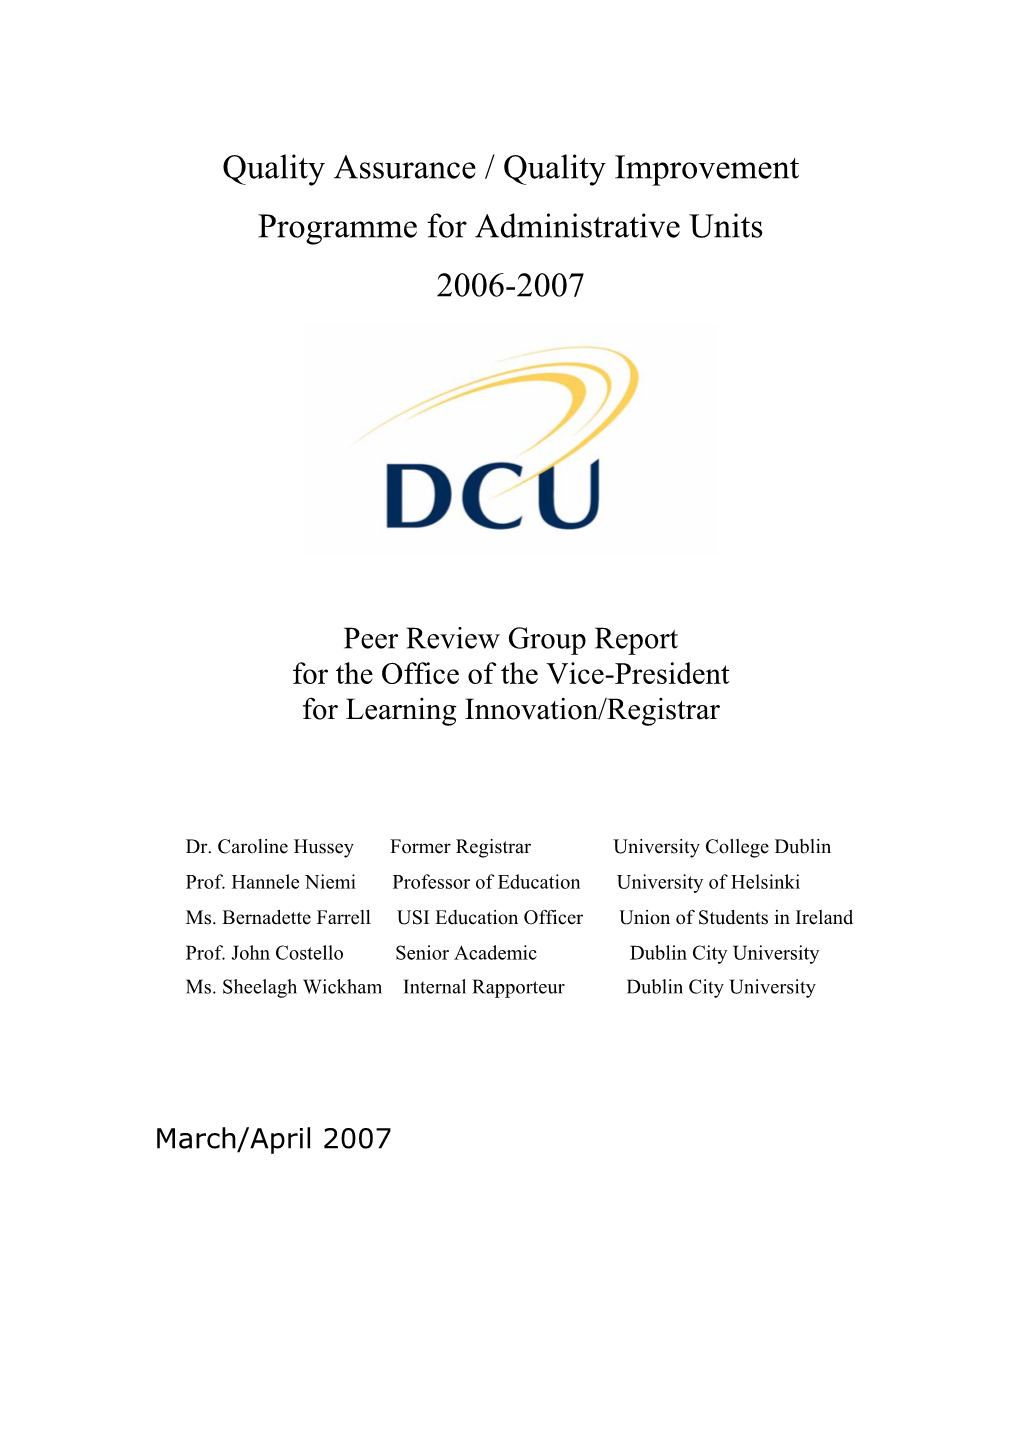 Quality Assurance / Quality Improvement Programme for Administrative Units 2006-2007